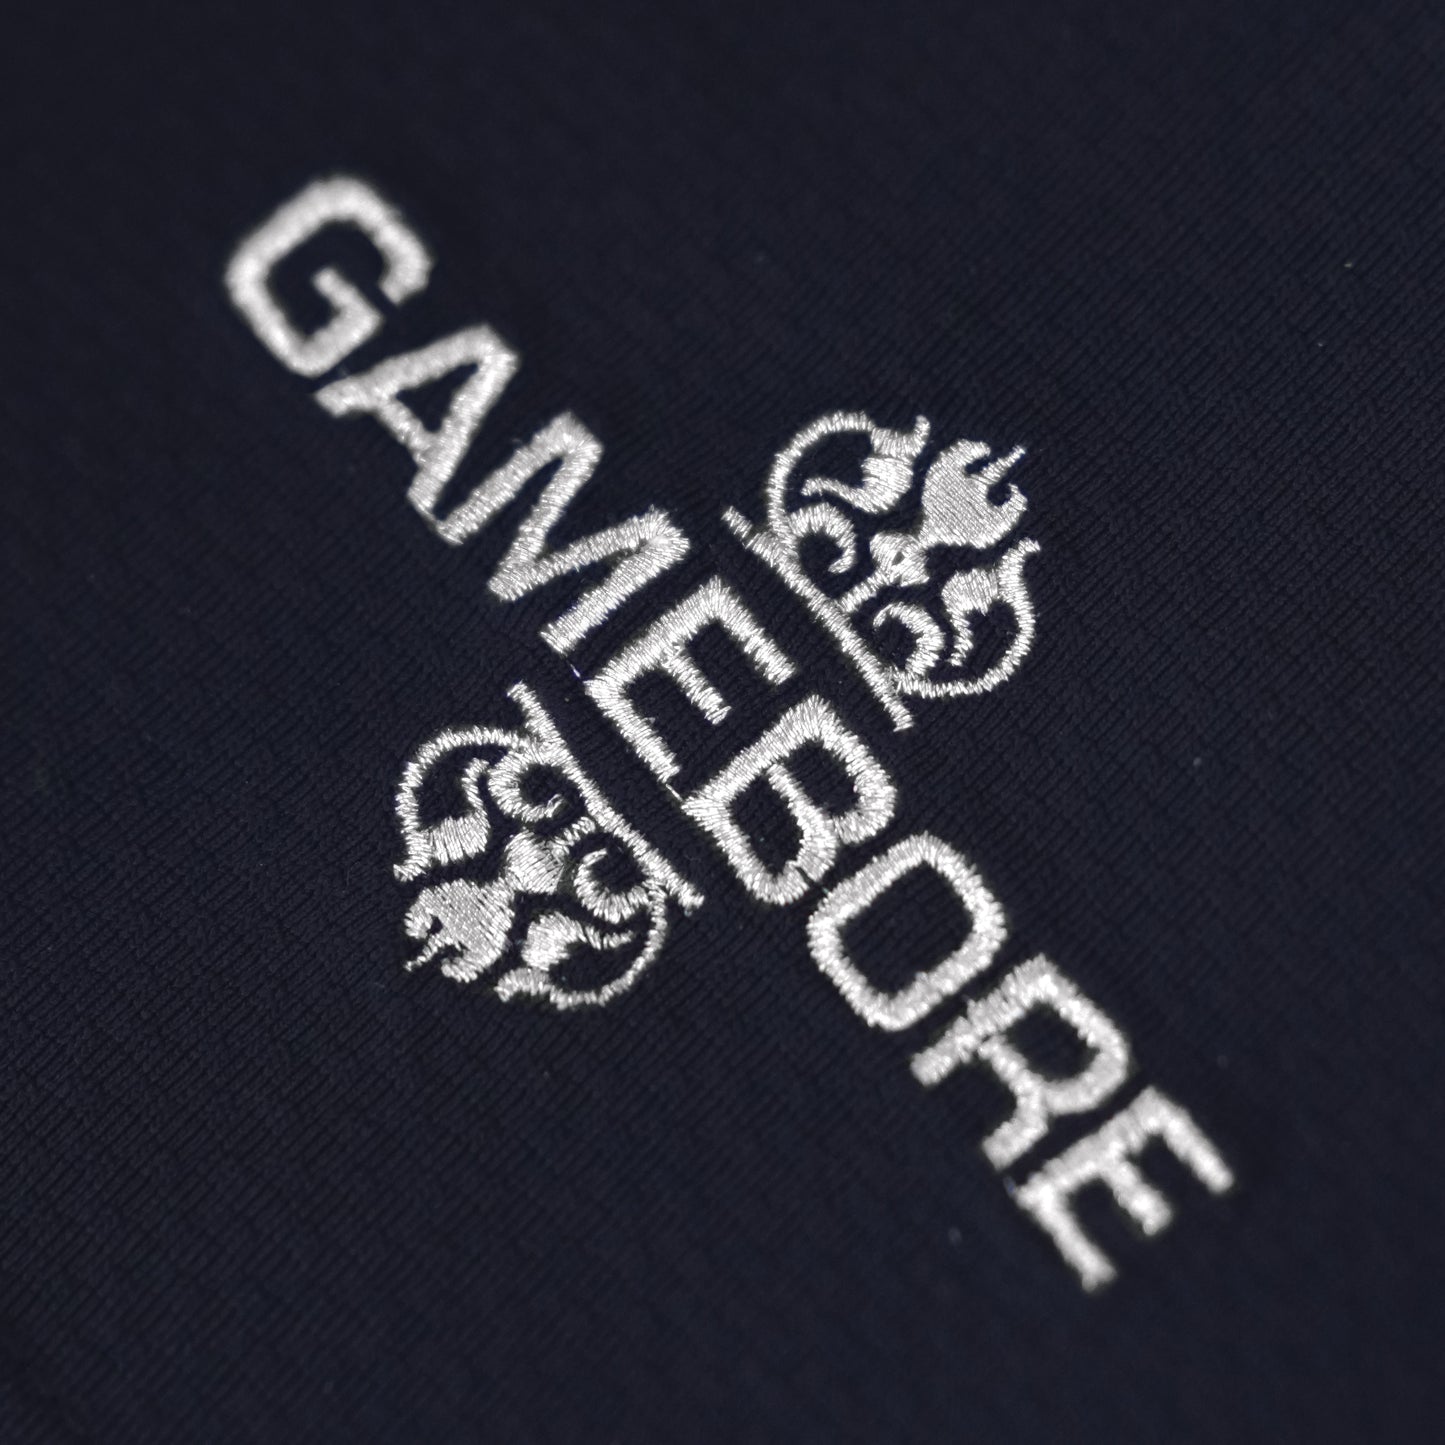 Gamebore Performance Polo